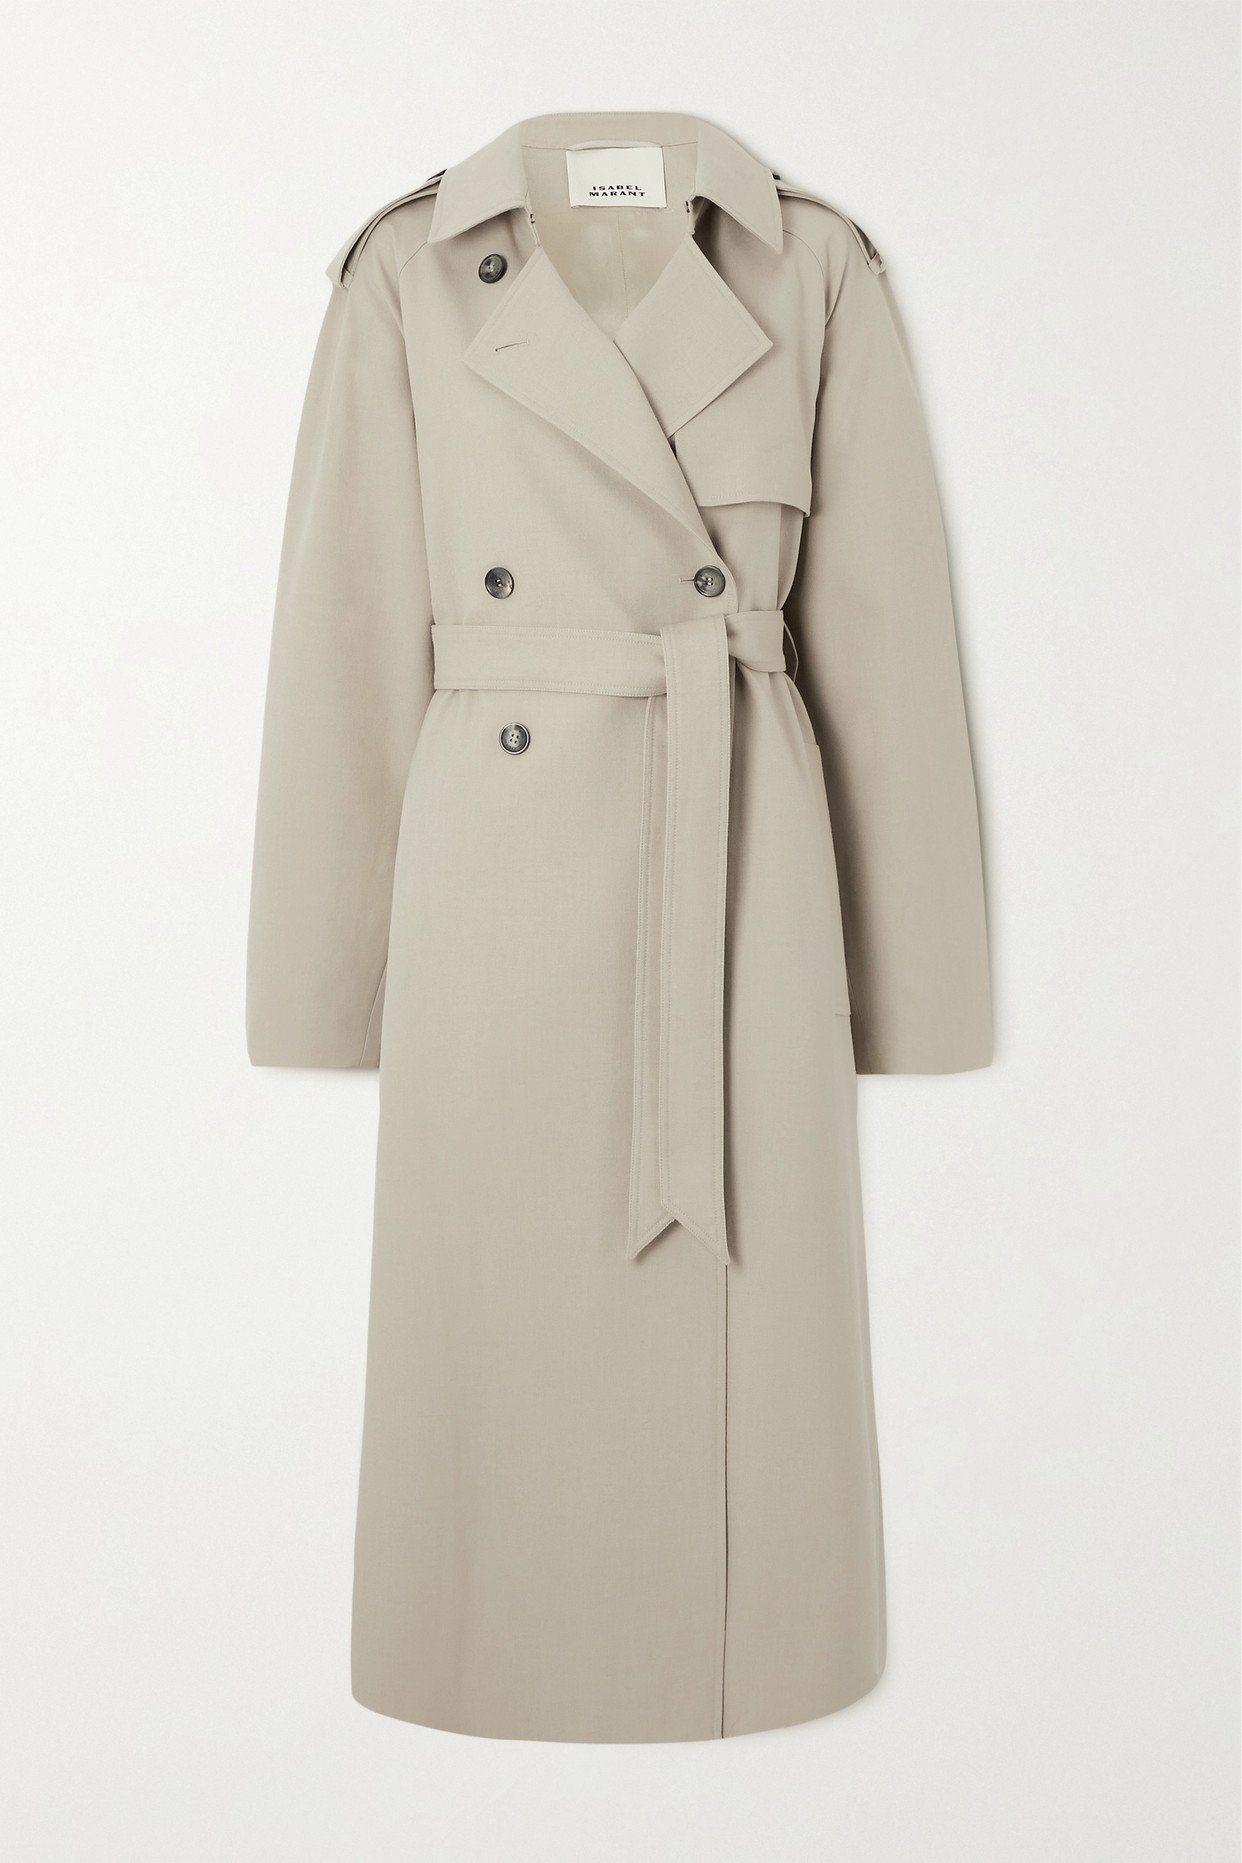 ISABEL MARANT Jepson Belted Double-Breasted Trench Coat in Gray | Endource